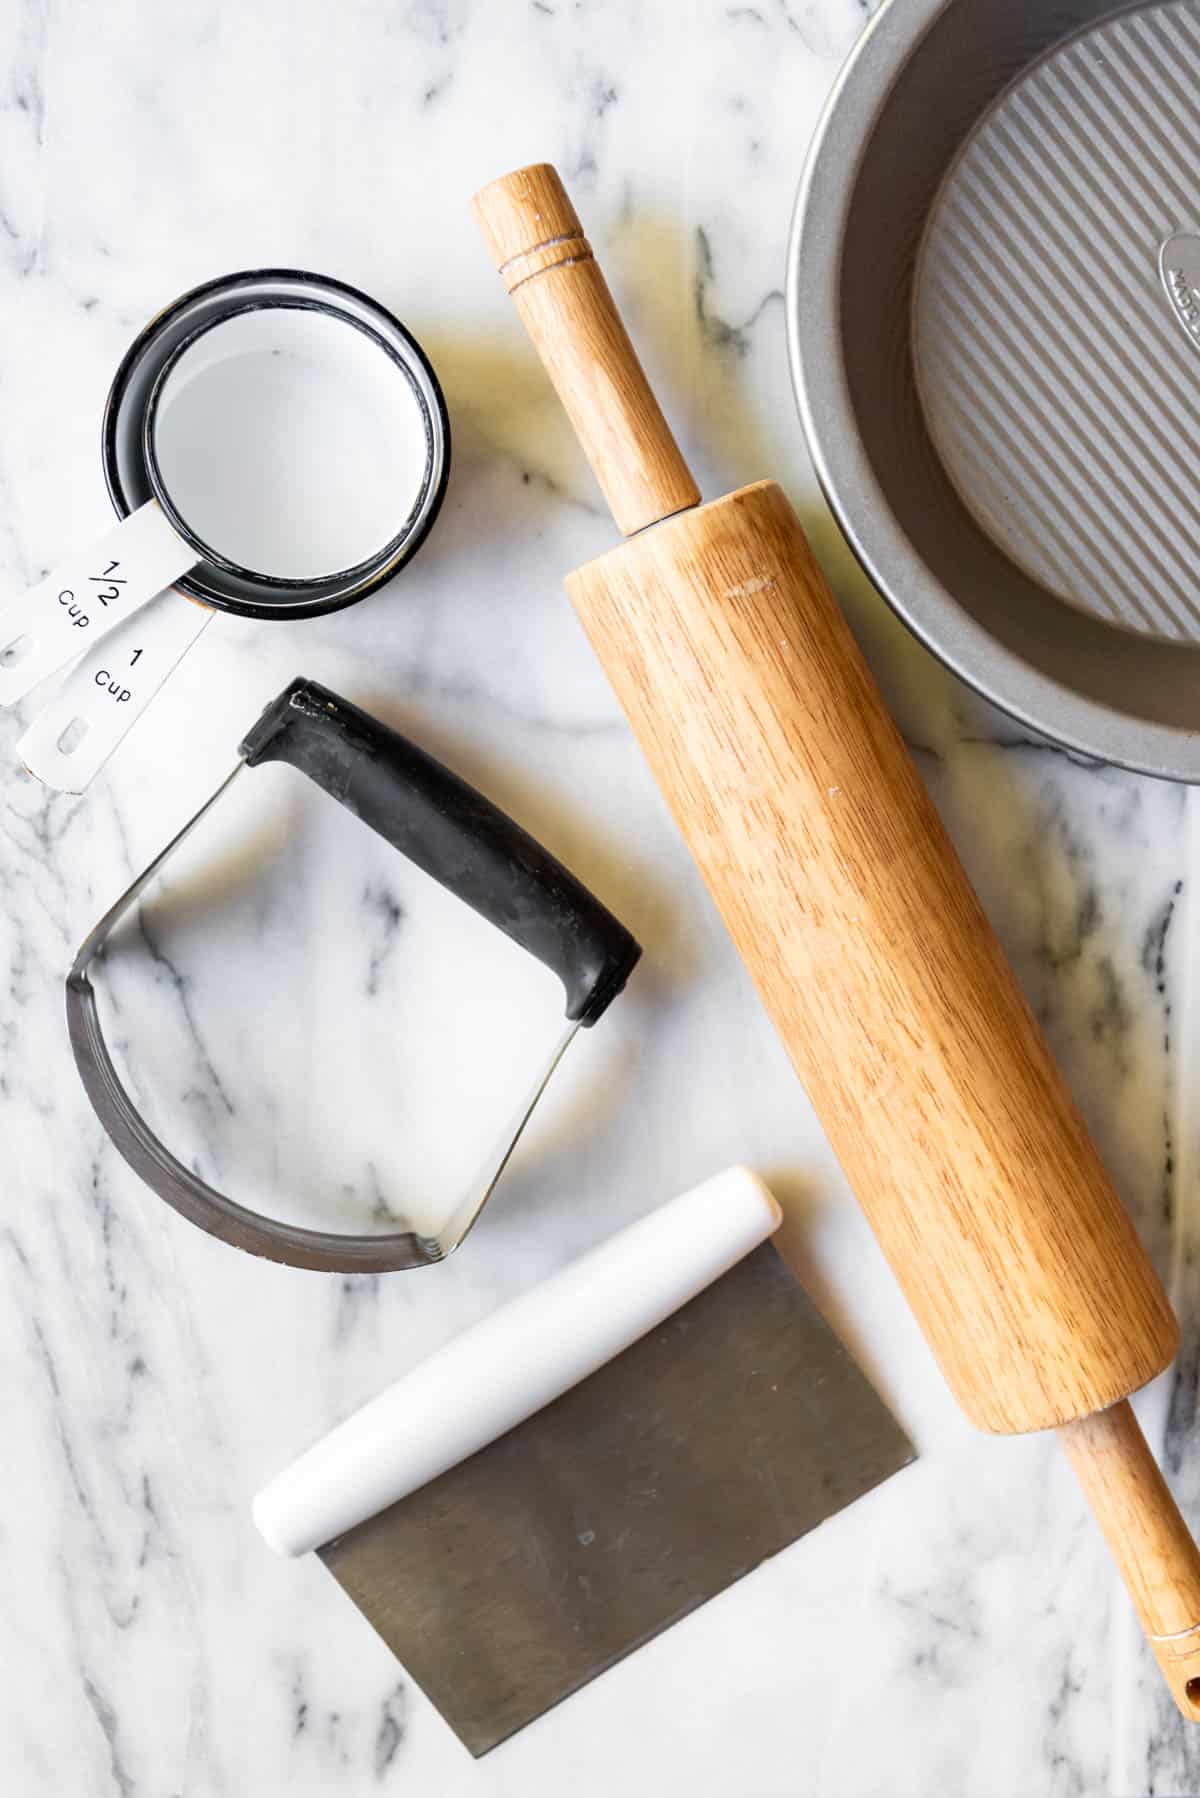 An image of a rolling pin, measuring cups, pastry cutter, pie plate, and bench scraper.